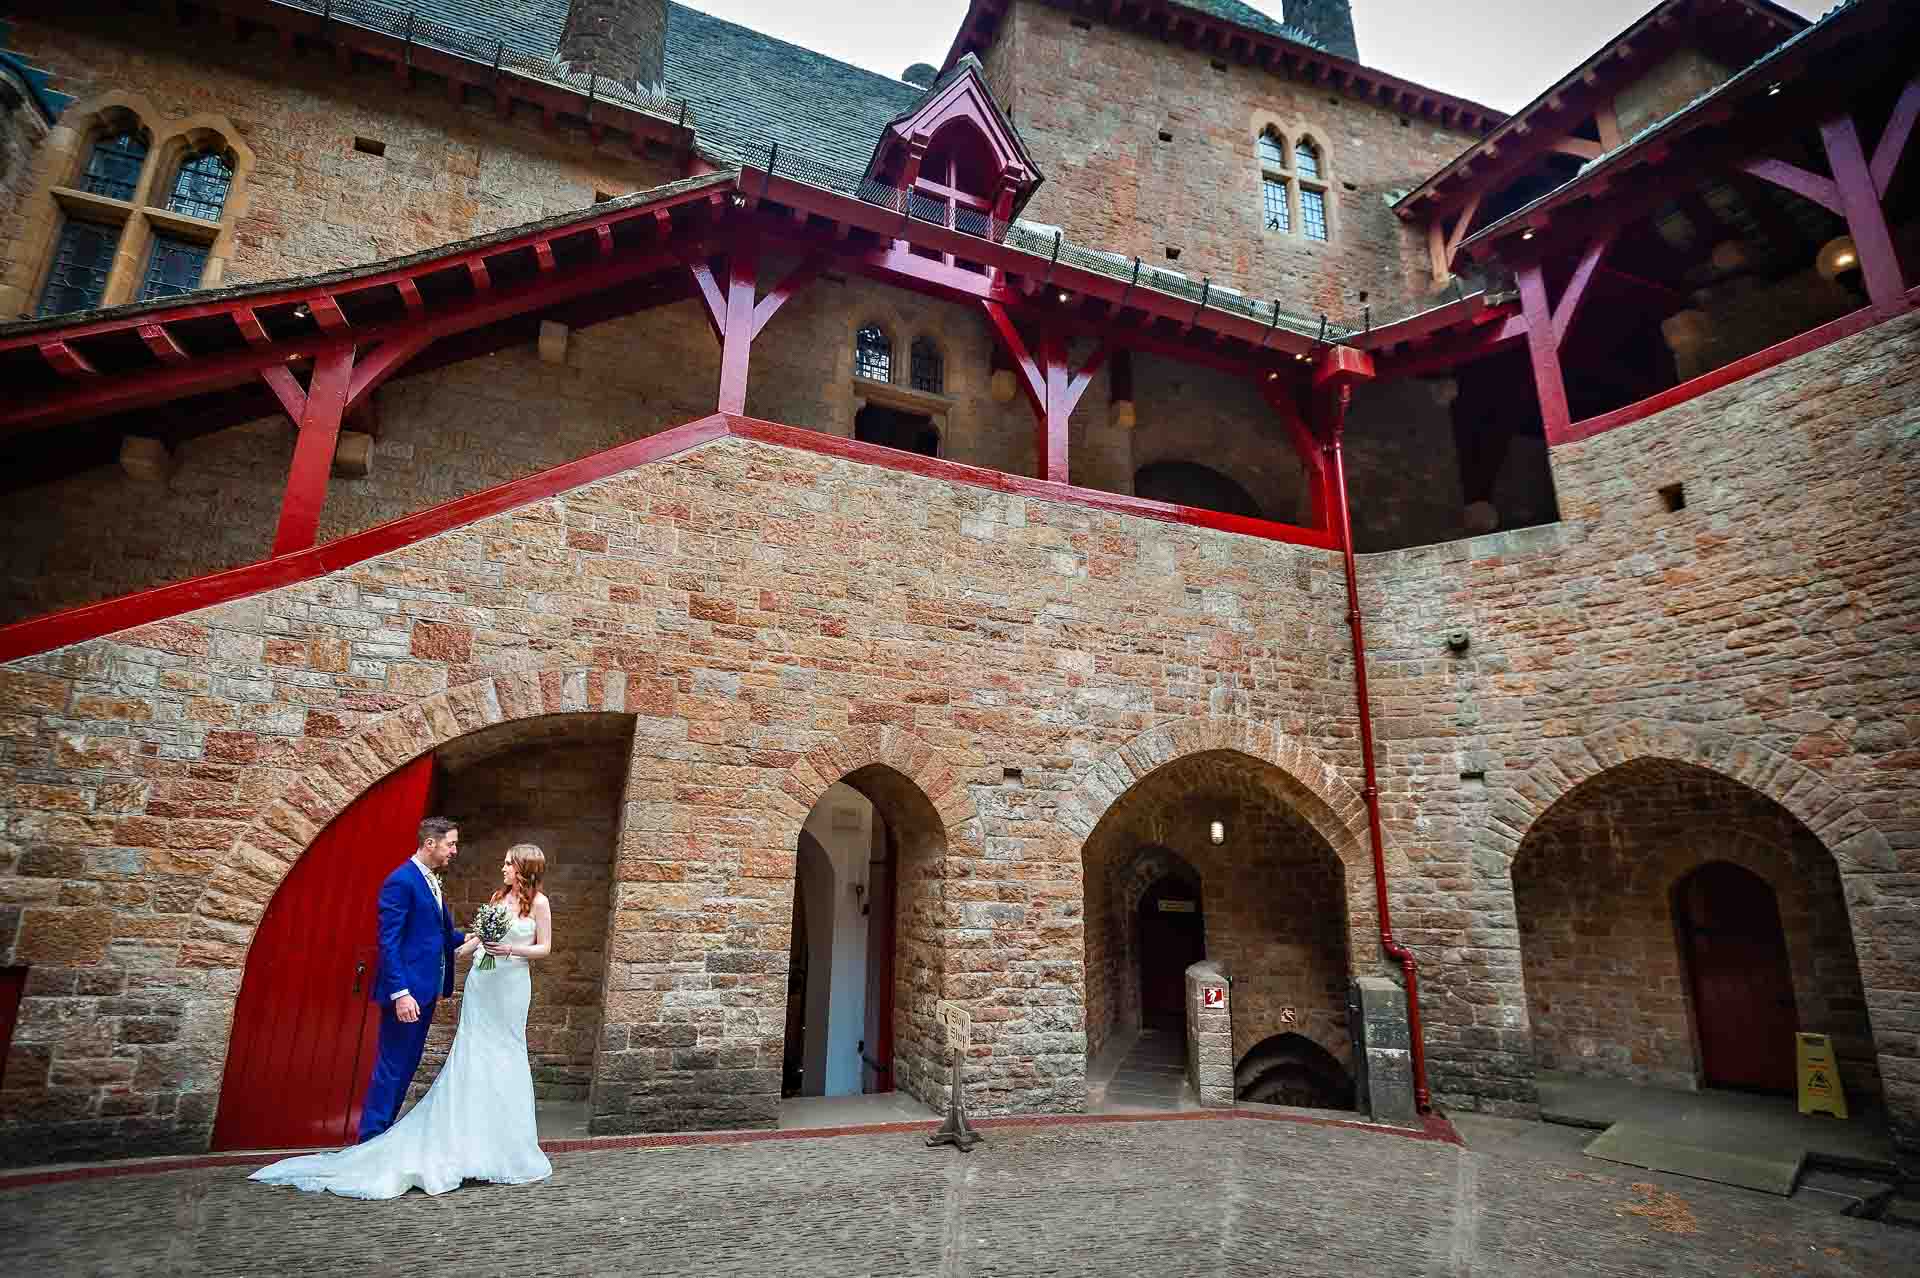 Newly married couple standing in courtyard of Castell Coch with arches in background - Guy Milnes Photography